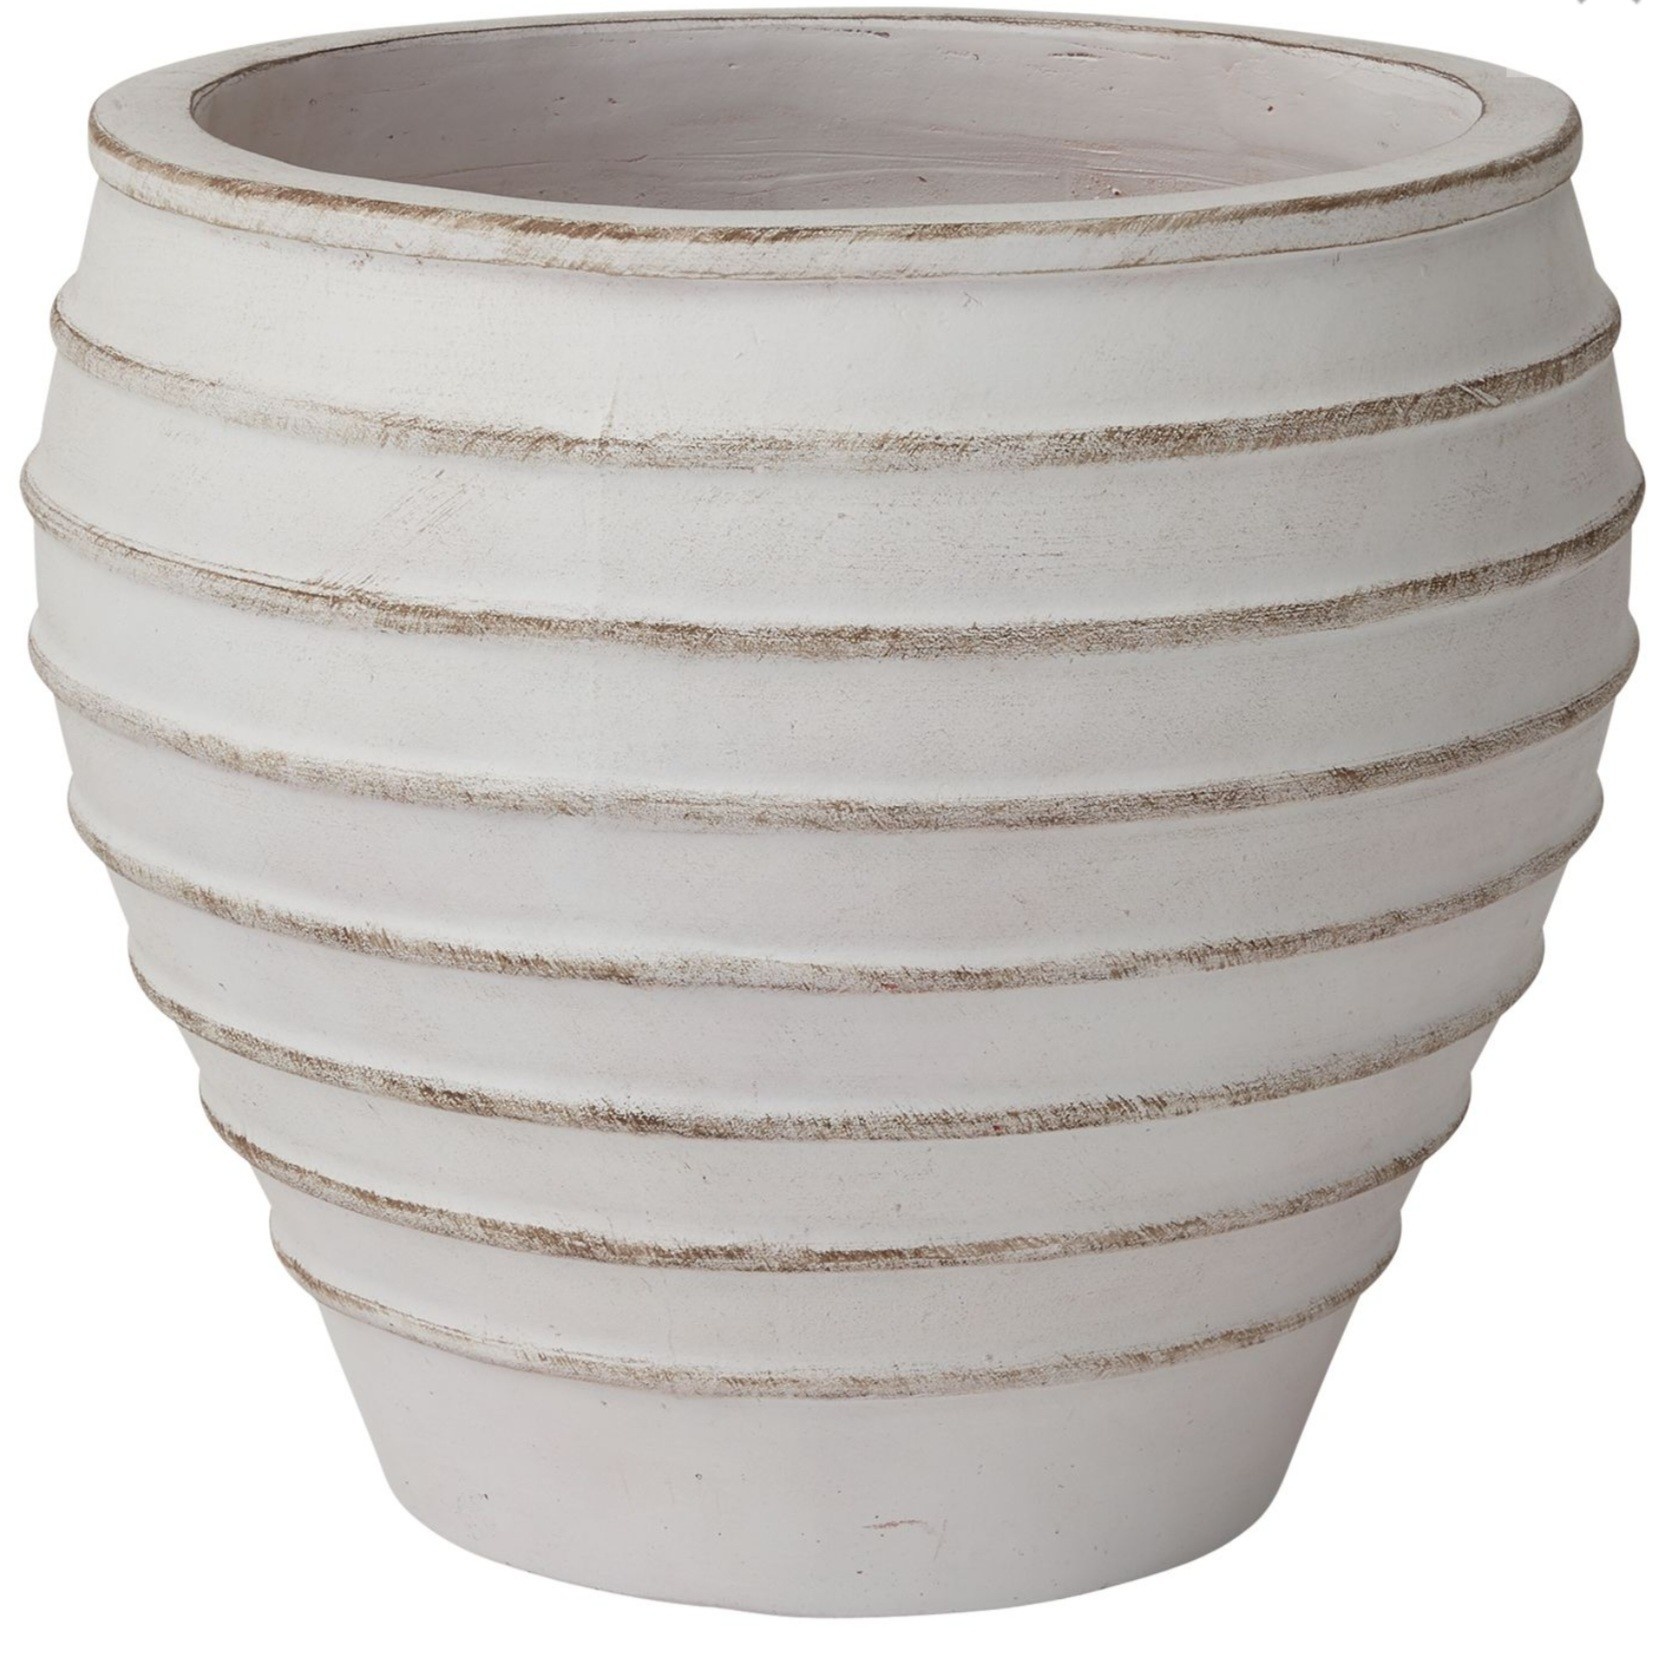 Porto Planter, Large, 14.75"21.5"x 19.5, Available for special order